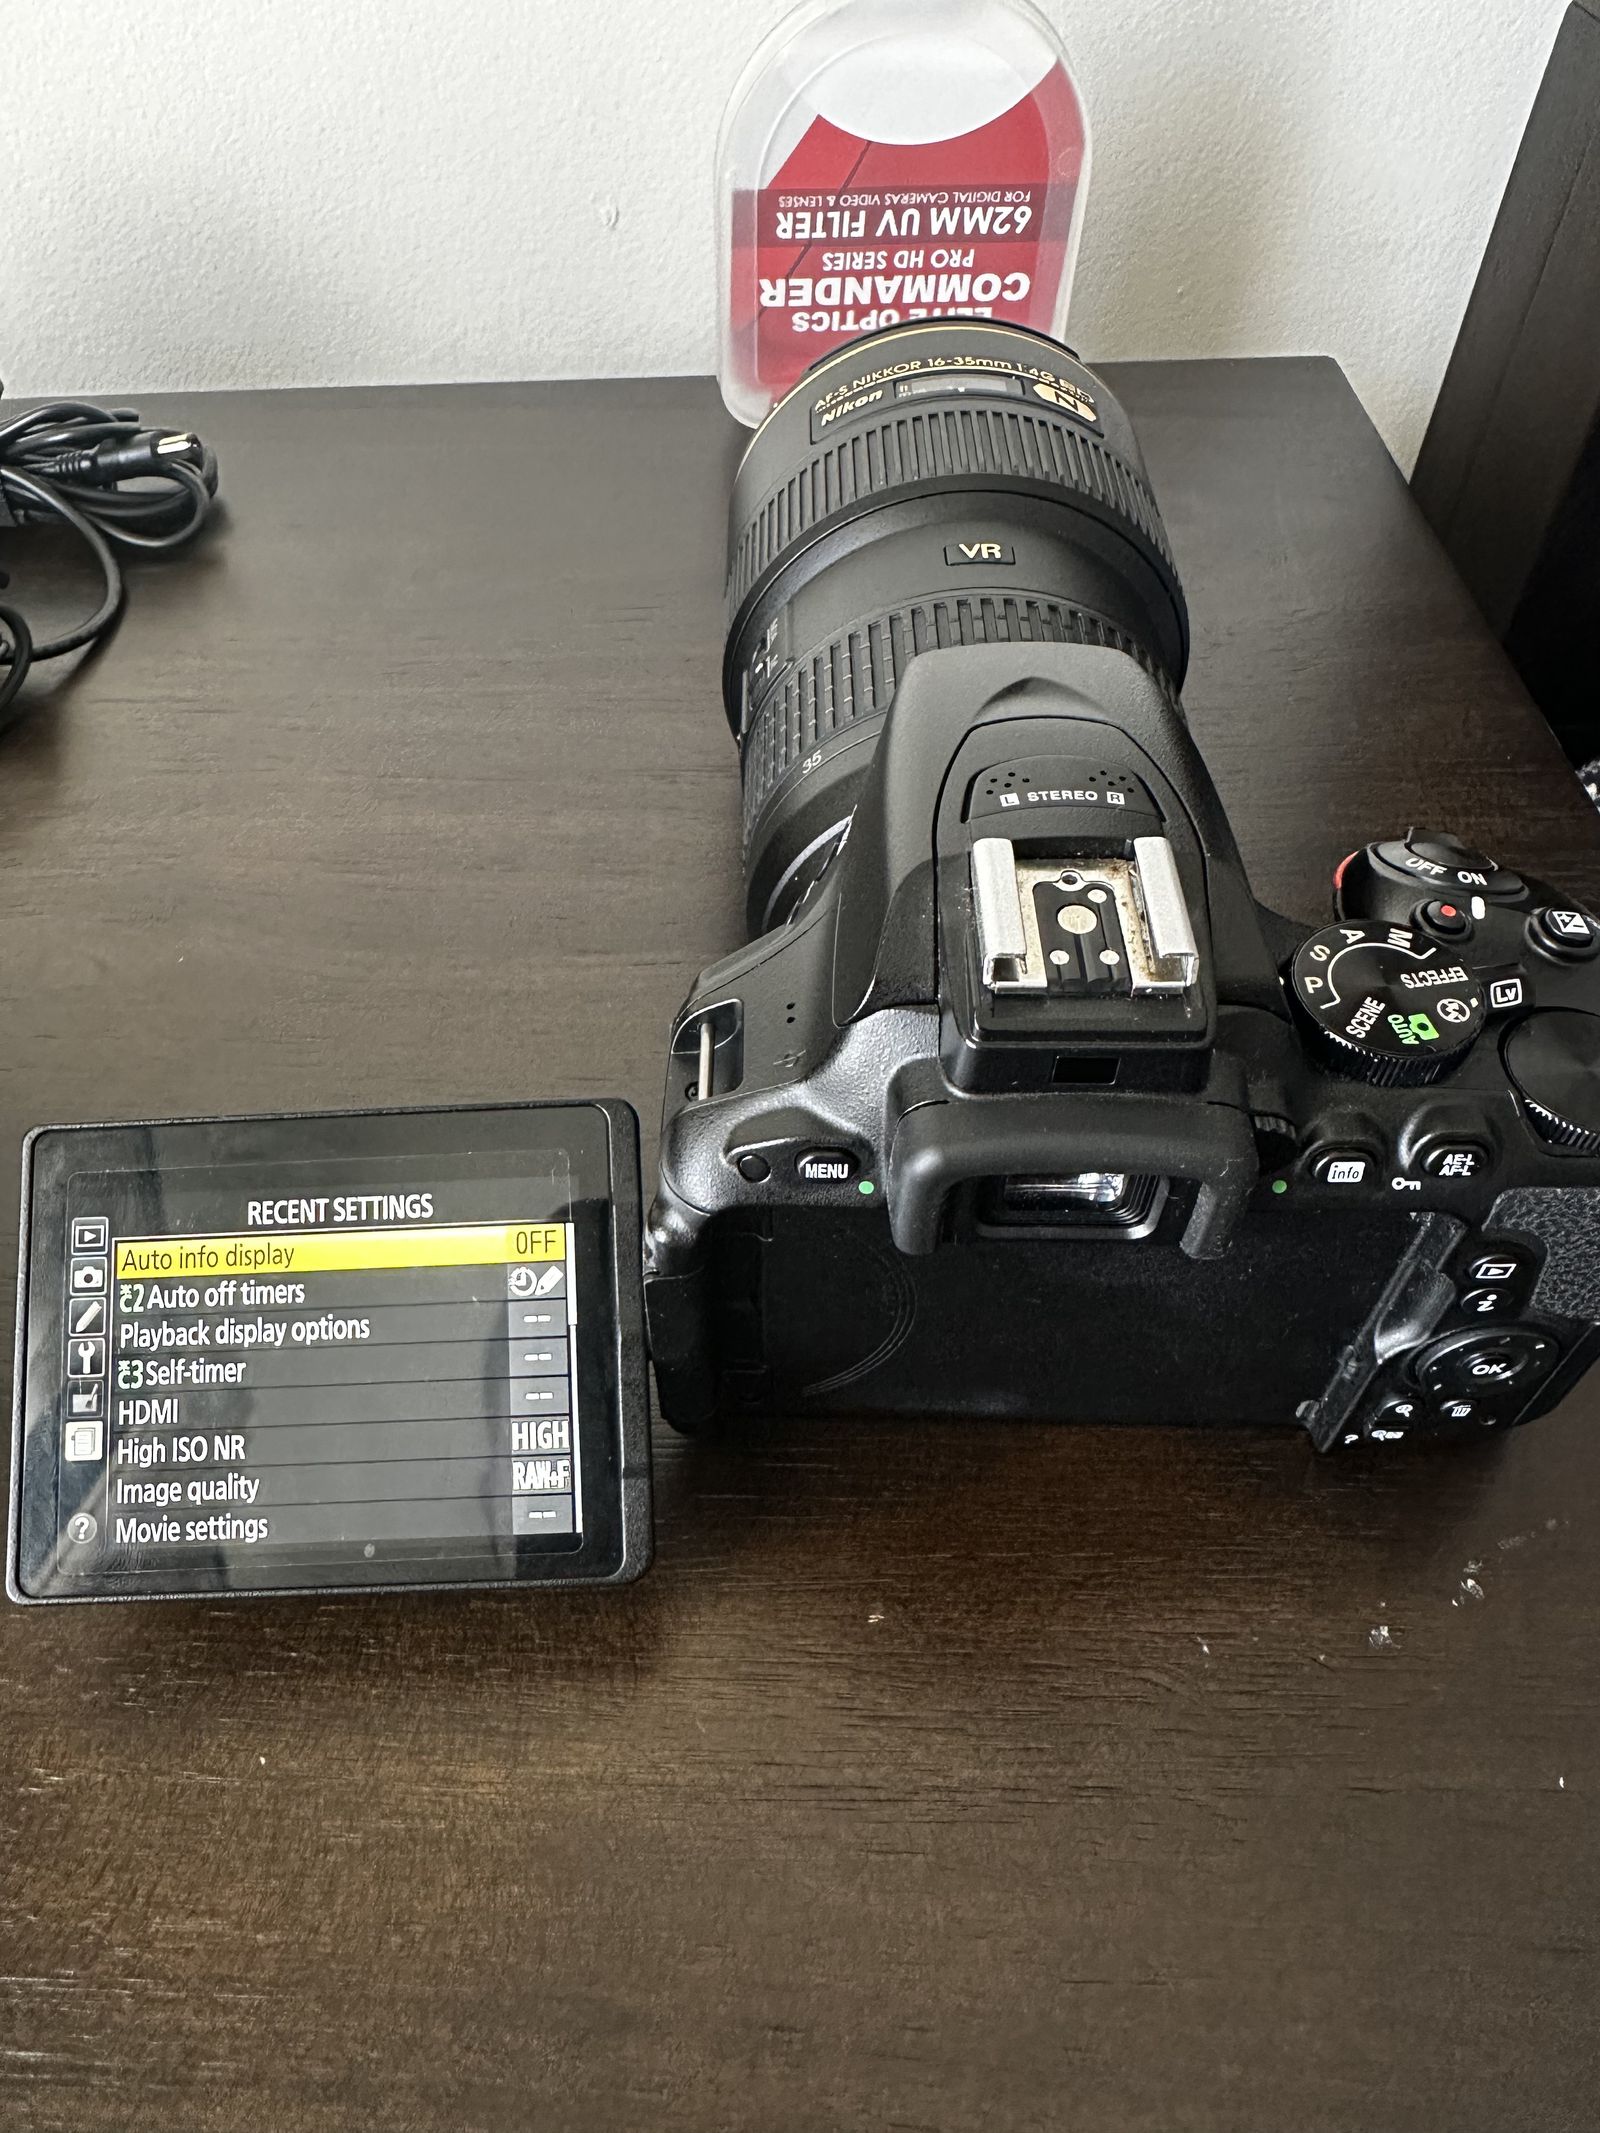 Nikon D5500 with lens and accessories